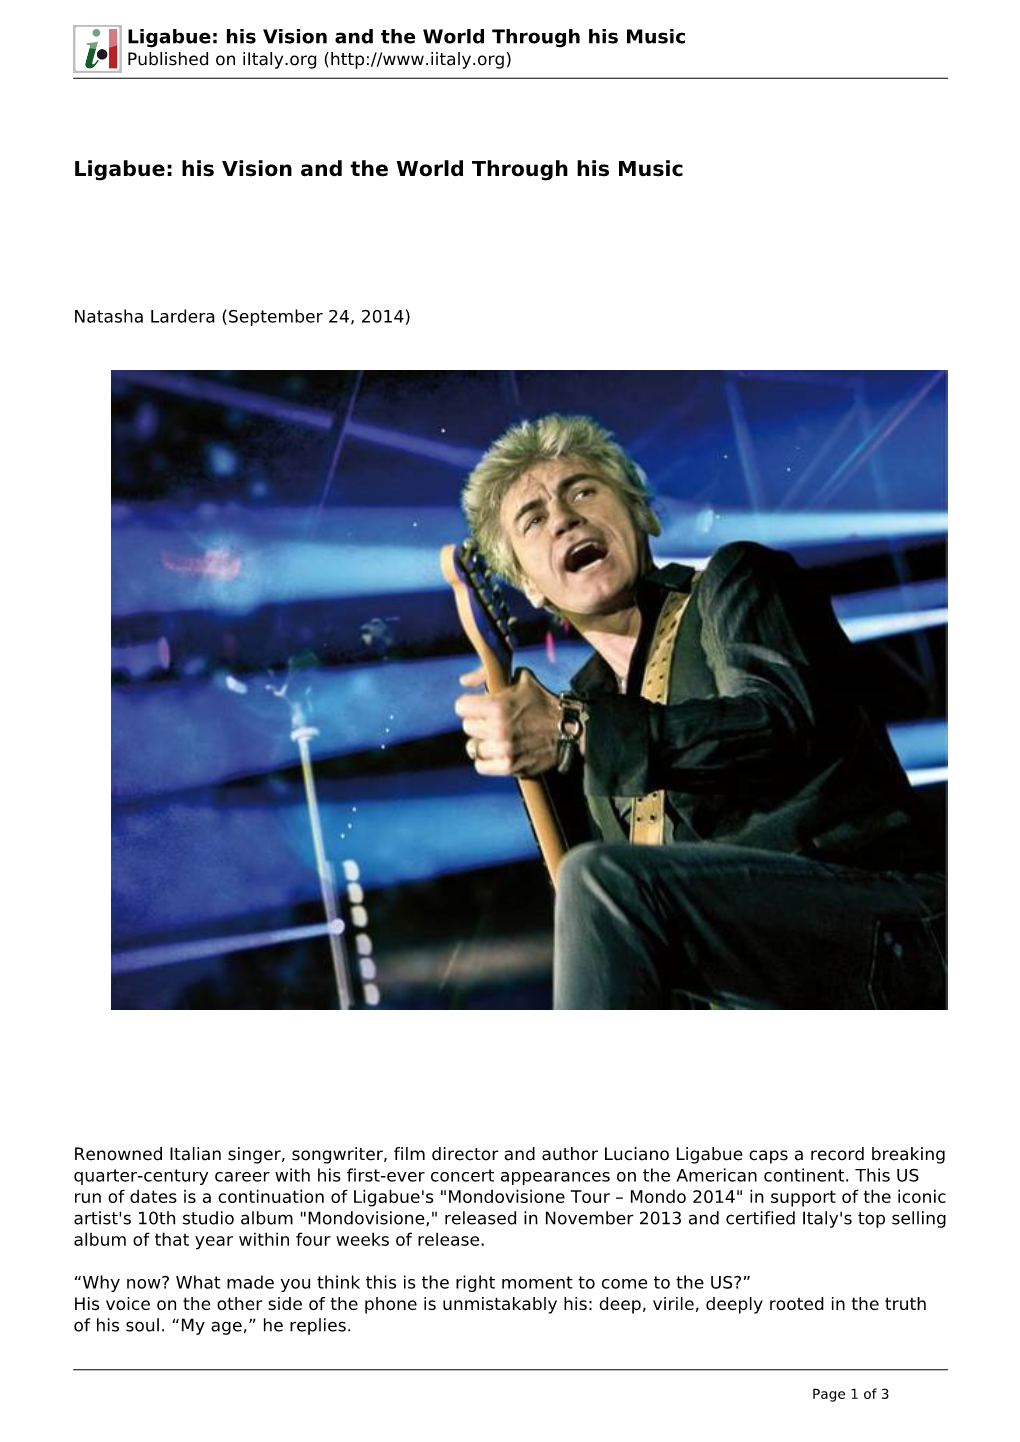 Ligabue: His Vision and the World Through His Music Published on Iitaly.Org (